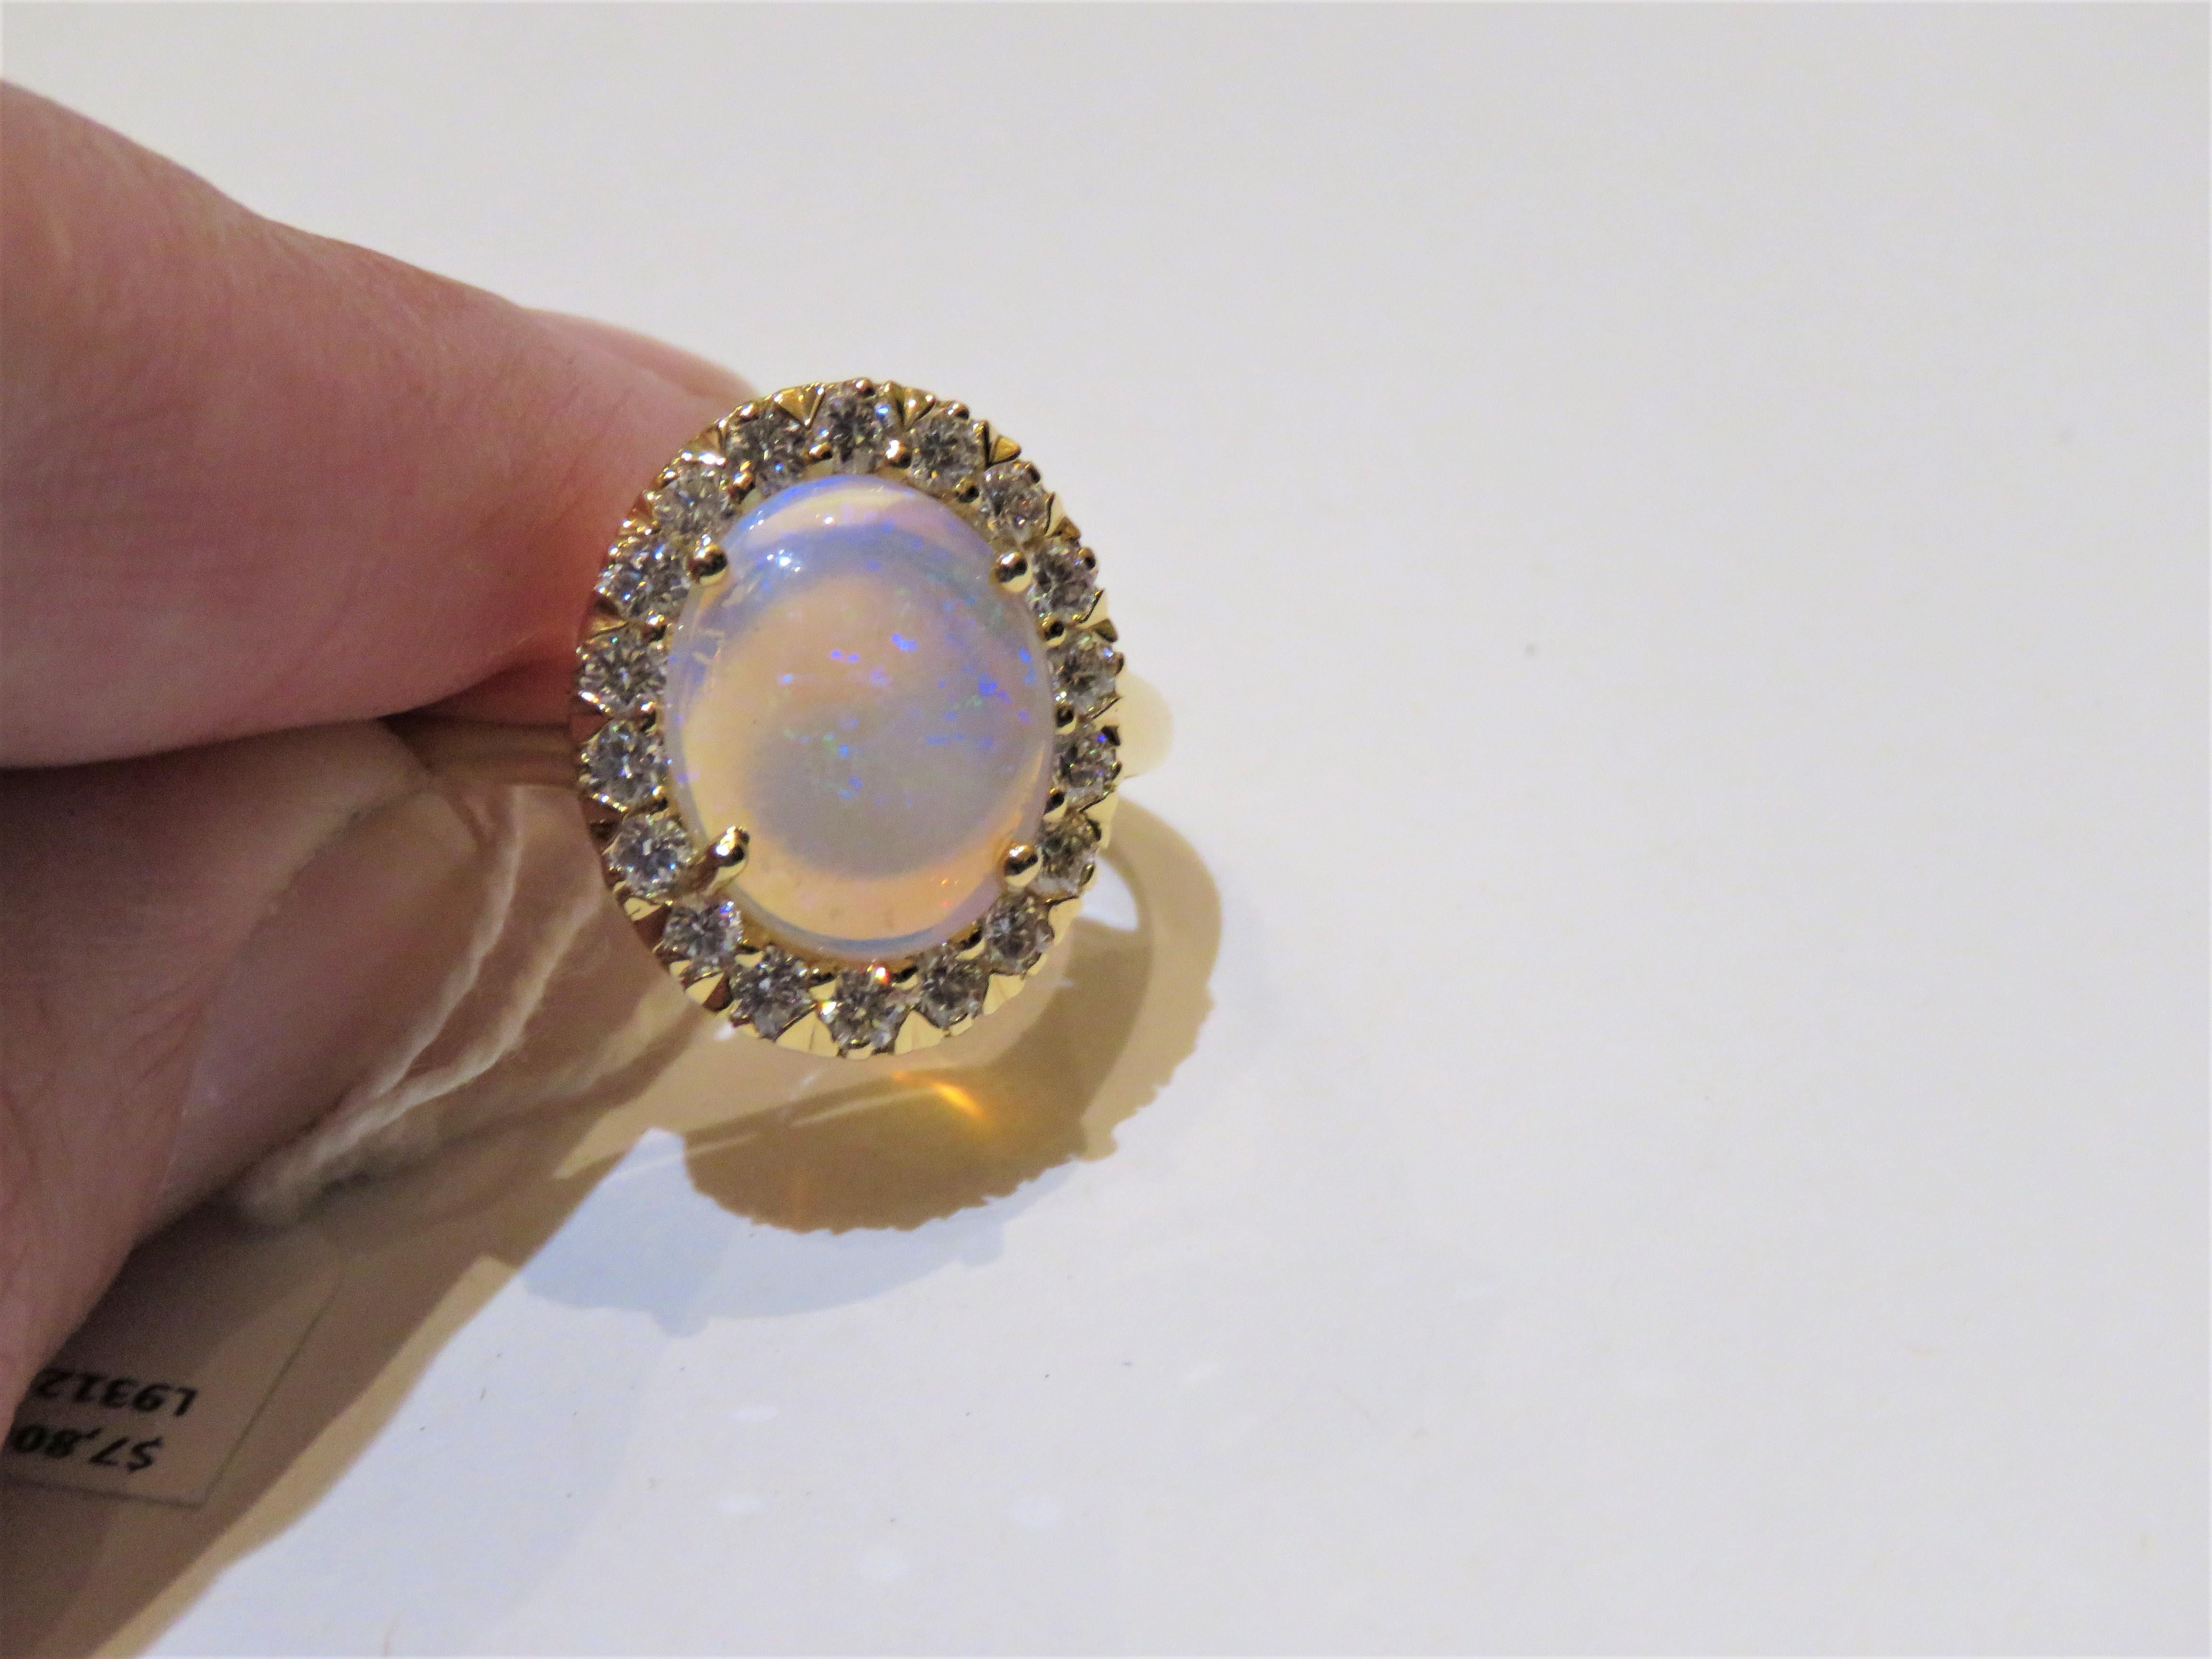 The Following Item we are offering is a Rare Important Radiant 18KT Gold Large Fancy Fiery White Opal Diamond Ring. Ring is comprised of A LARGE Gorgeous Fancy White Ethiopian Opal surrounded by a Beautiful Fancy surrounded Halo of Diamonds!! T.C.W